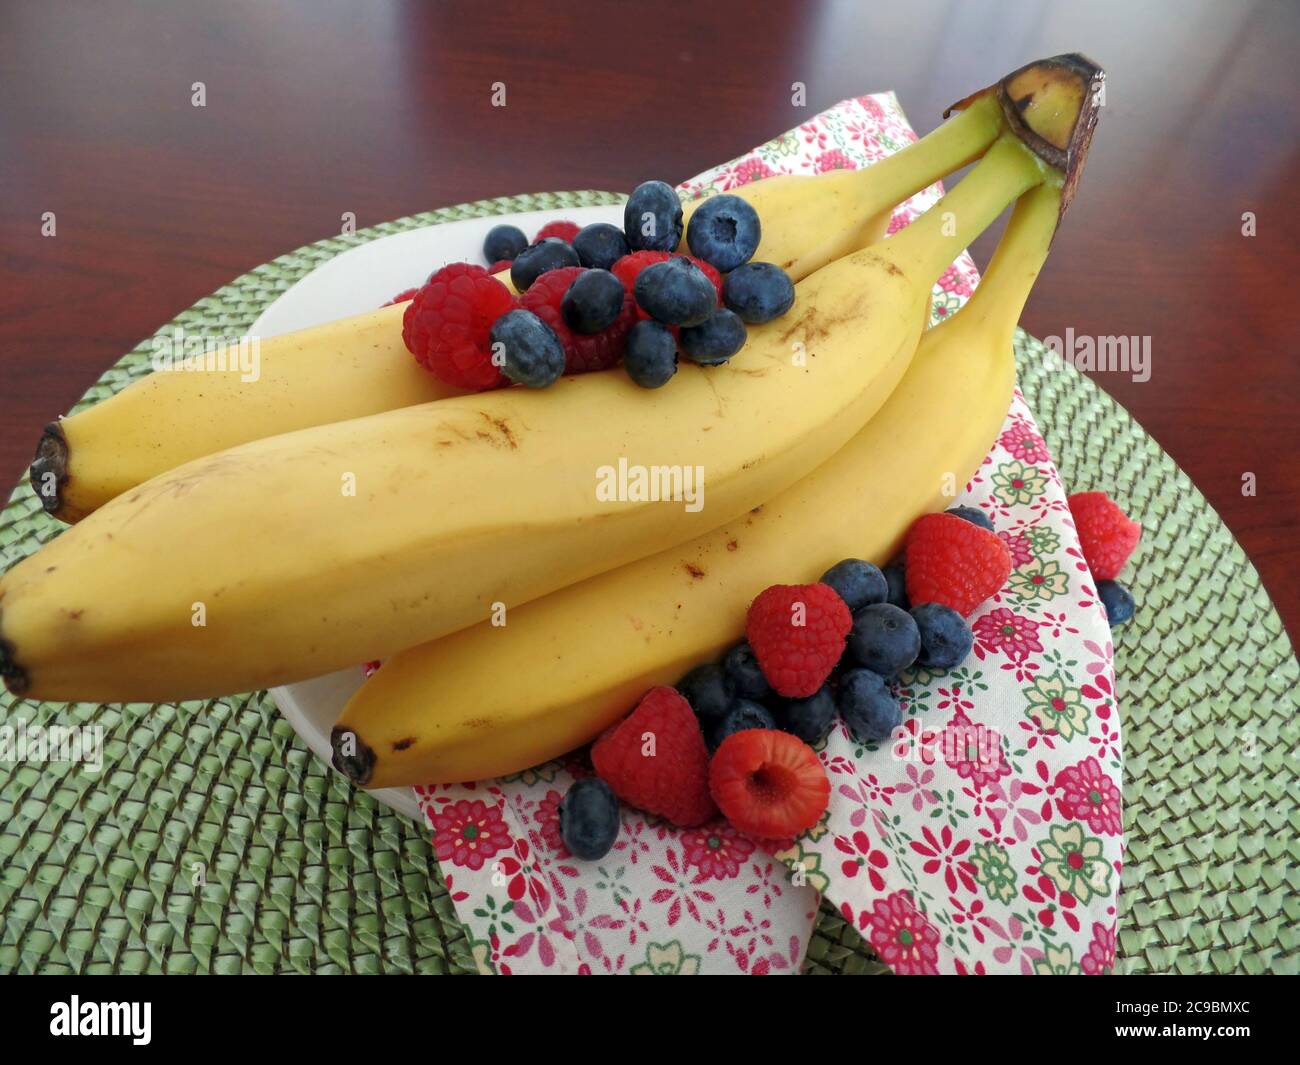 Bananas with raspberries and blueberries Stock Photo